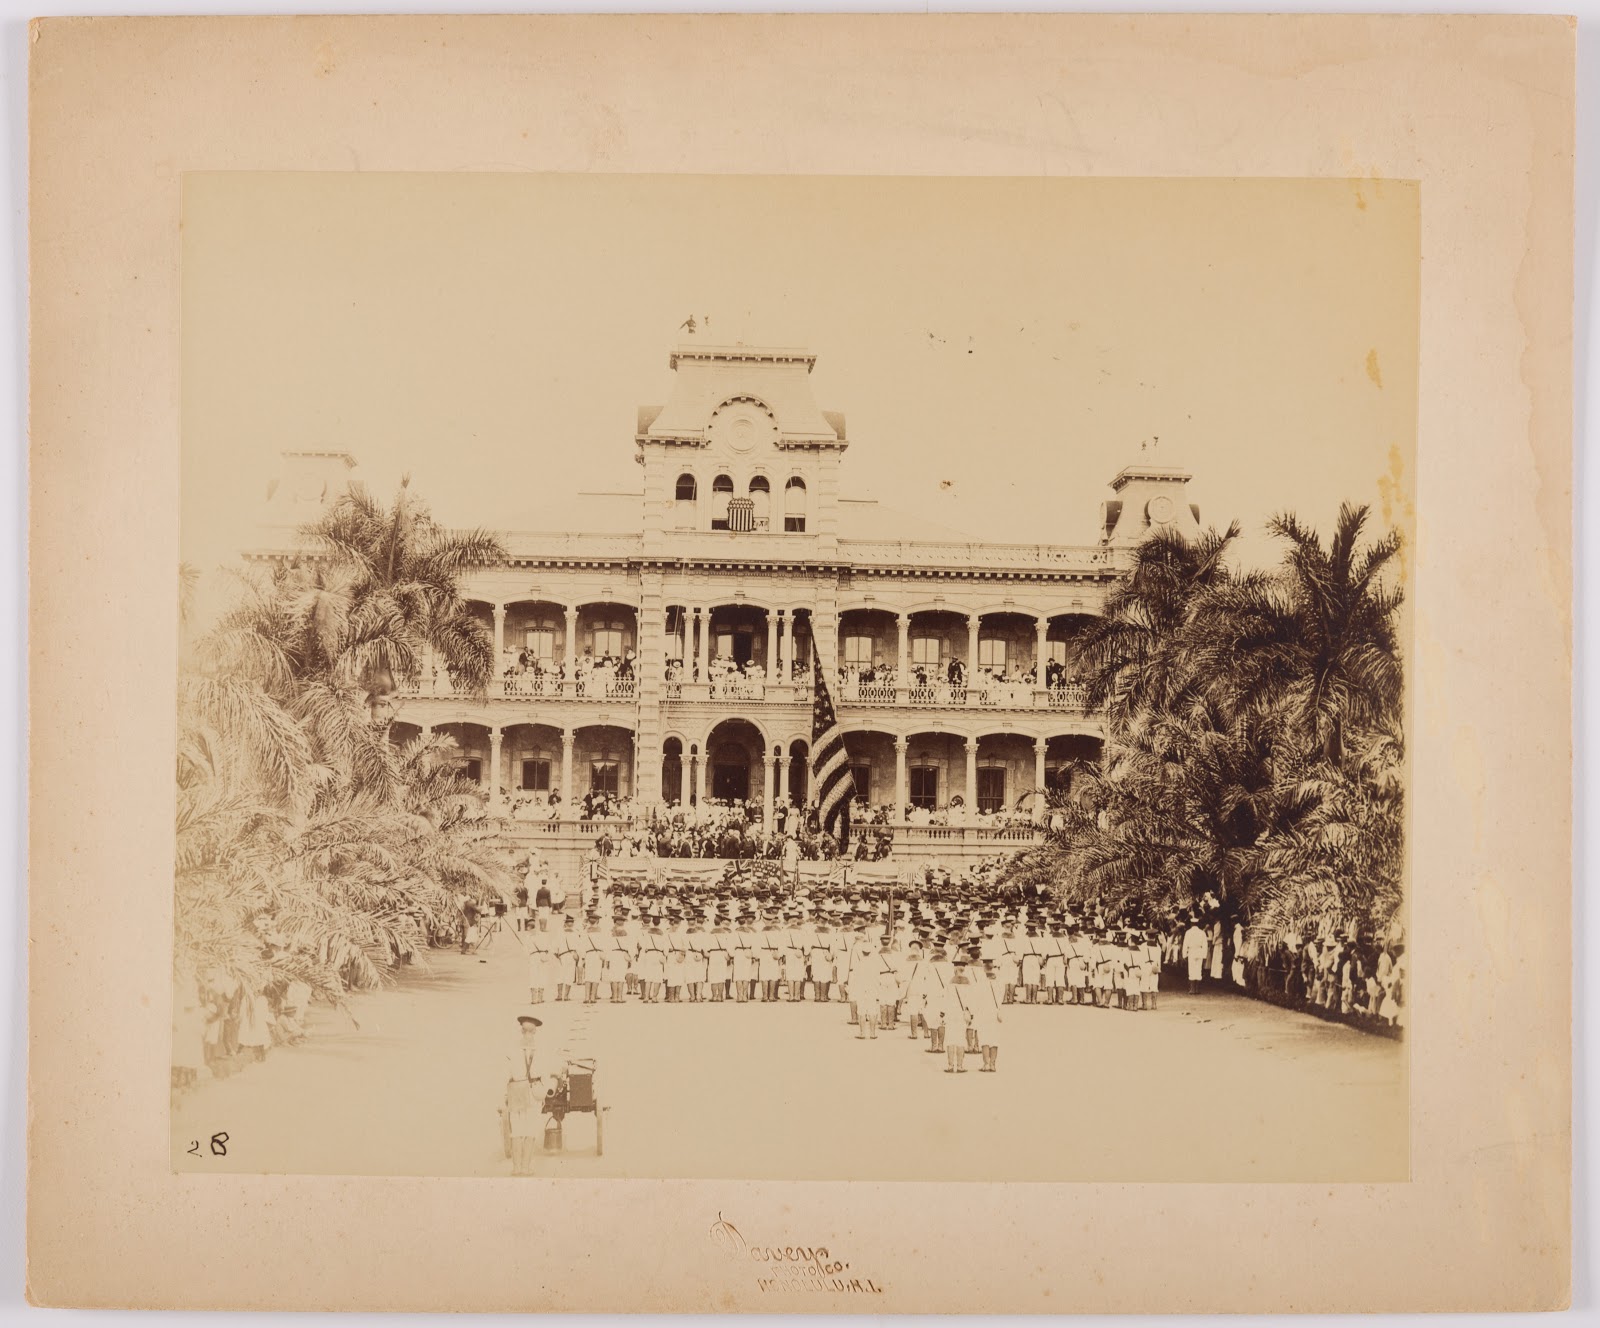 The raising of the American flag at the United States annexation ceremony at ʻIolani Palace in Honolulu, Oʻahu. The U.S.S. Philadelphia marines perform the ceremony, photographed by Frank Davey, August 12, 1898, Los Angeles County Museum of Art, partial gift of Mark and Carolyn Blackburn and purchased with funds from LACMA's 50th Anniversary Gala and FIJI Water, photo © Museum Associates/LACMA